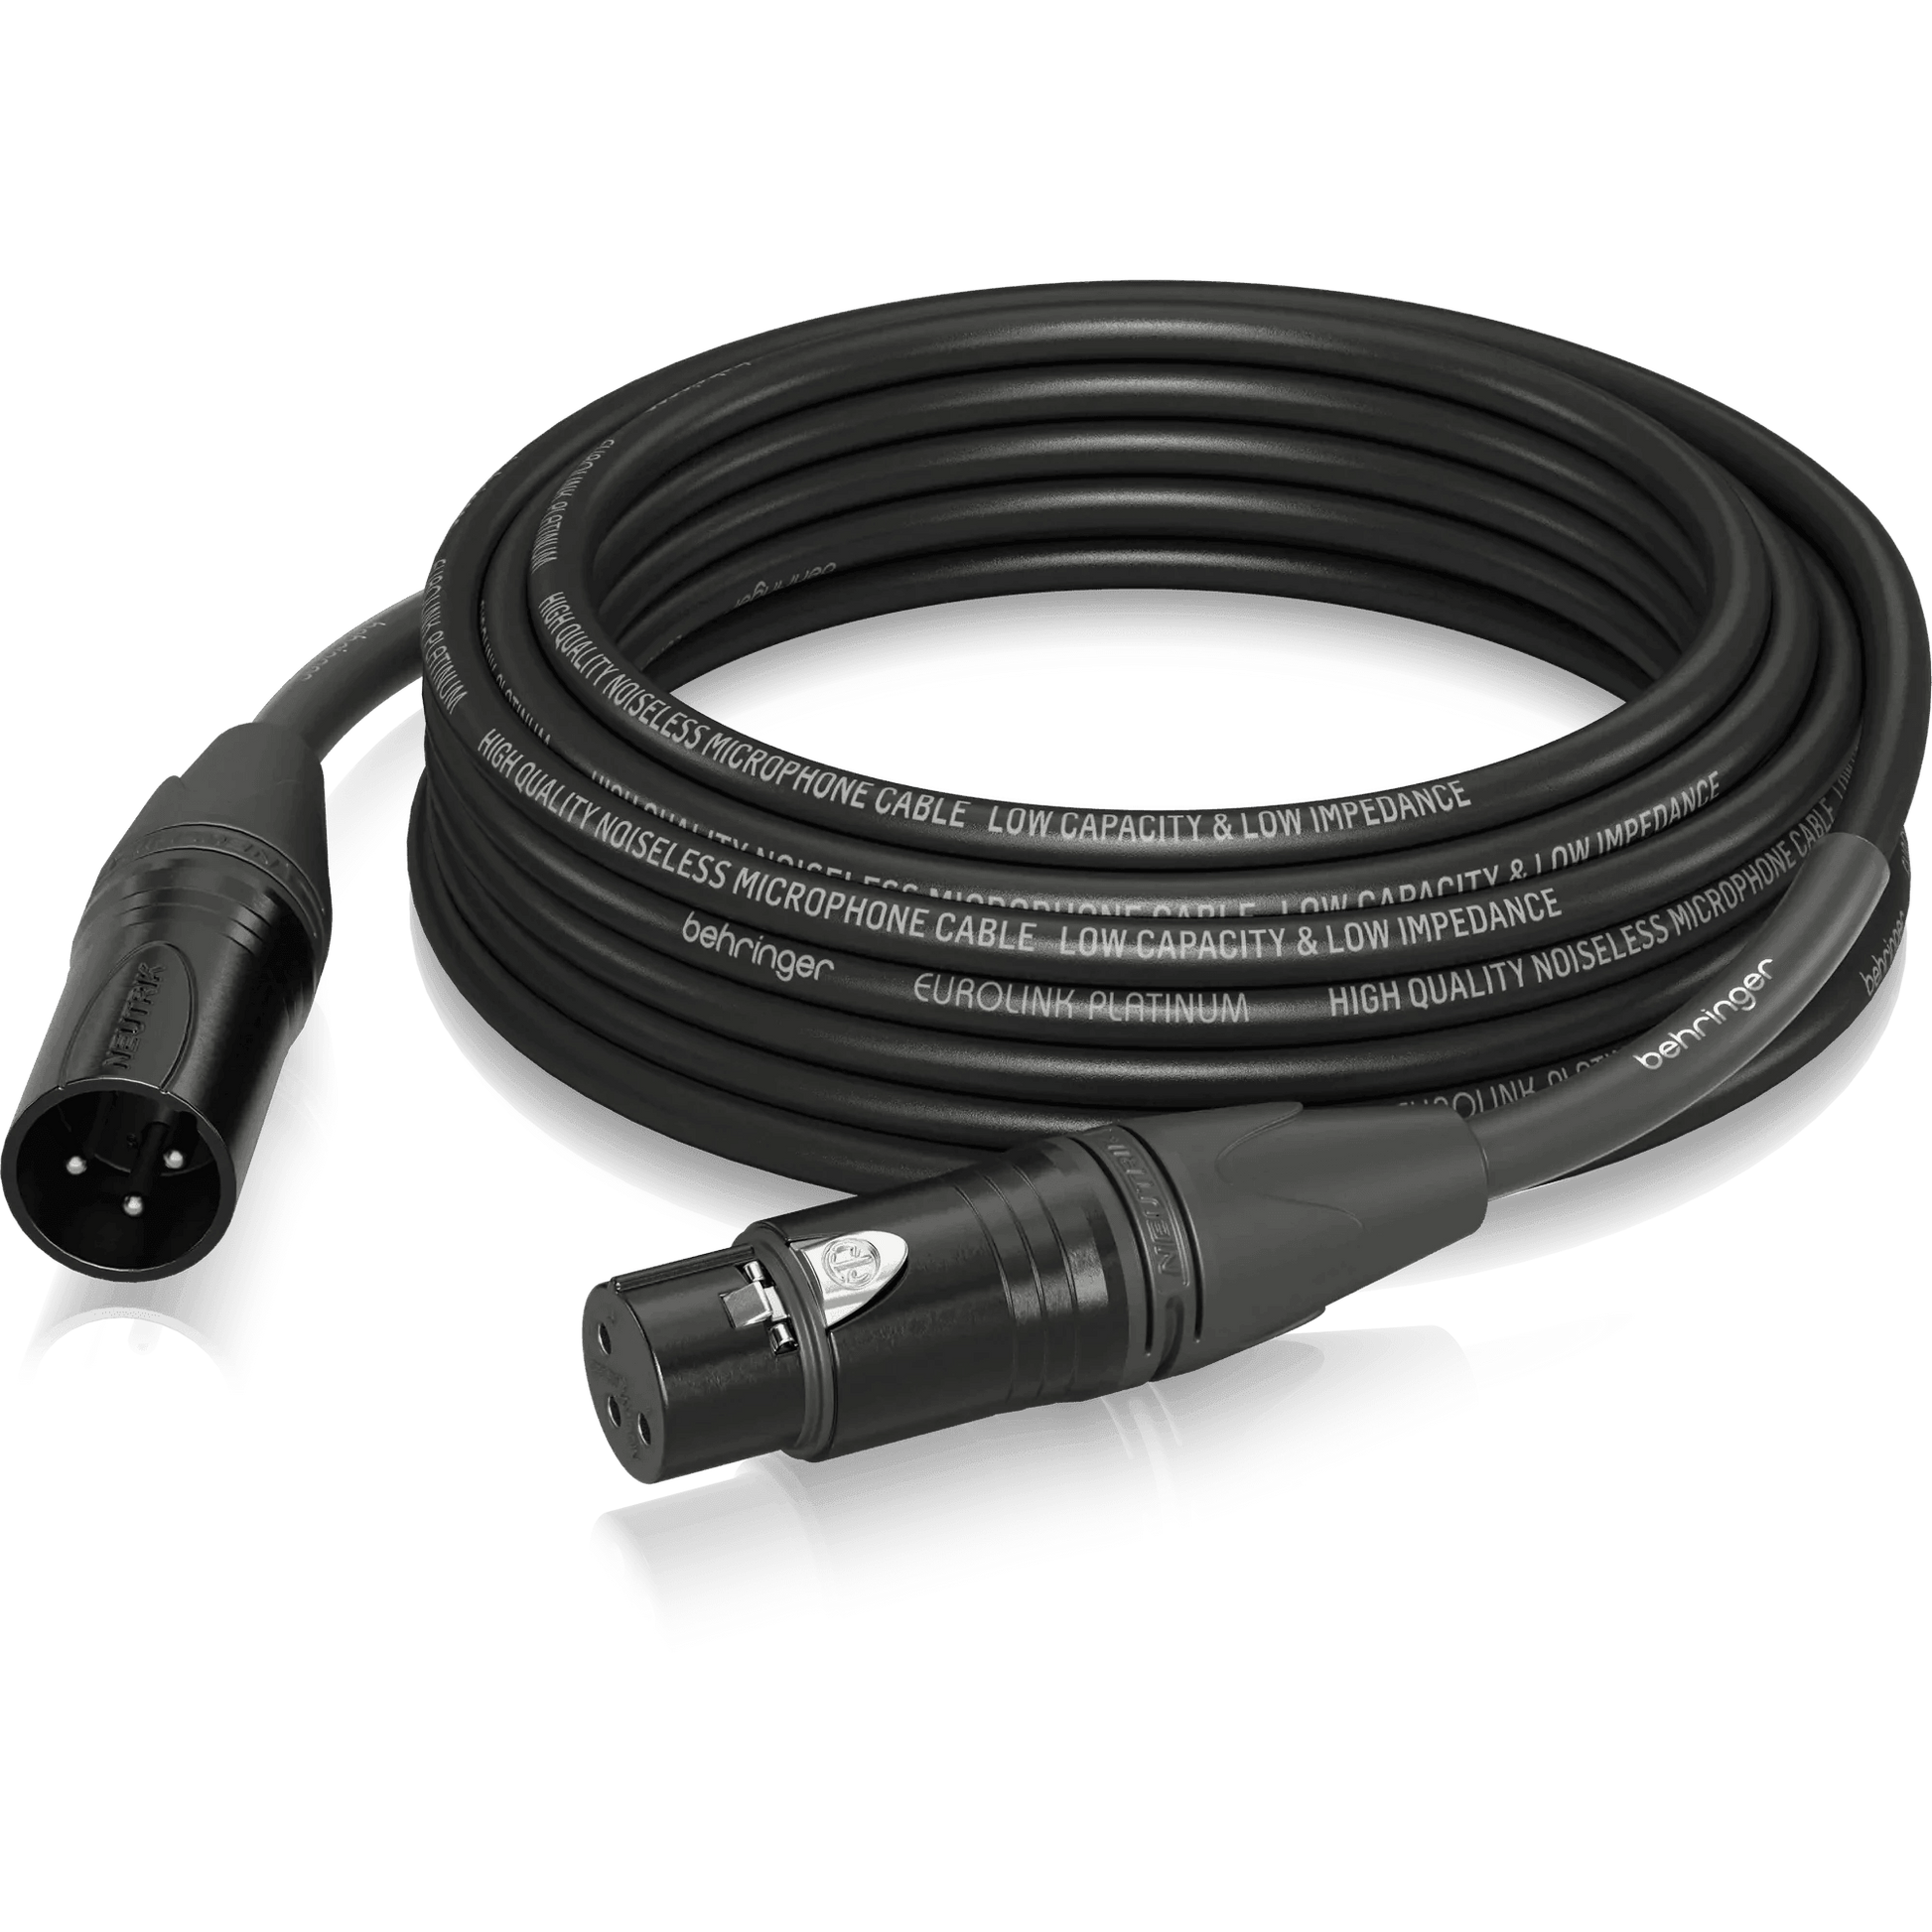 Behringer PMC-1000 Platinum Performance 10 m (32.8 ft) Microphone Cable with XLR Connectors